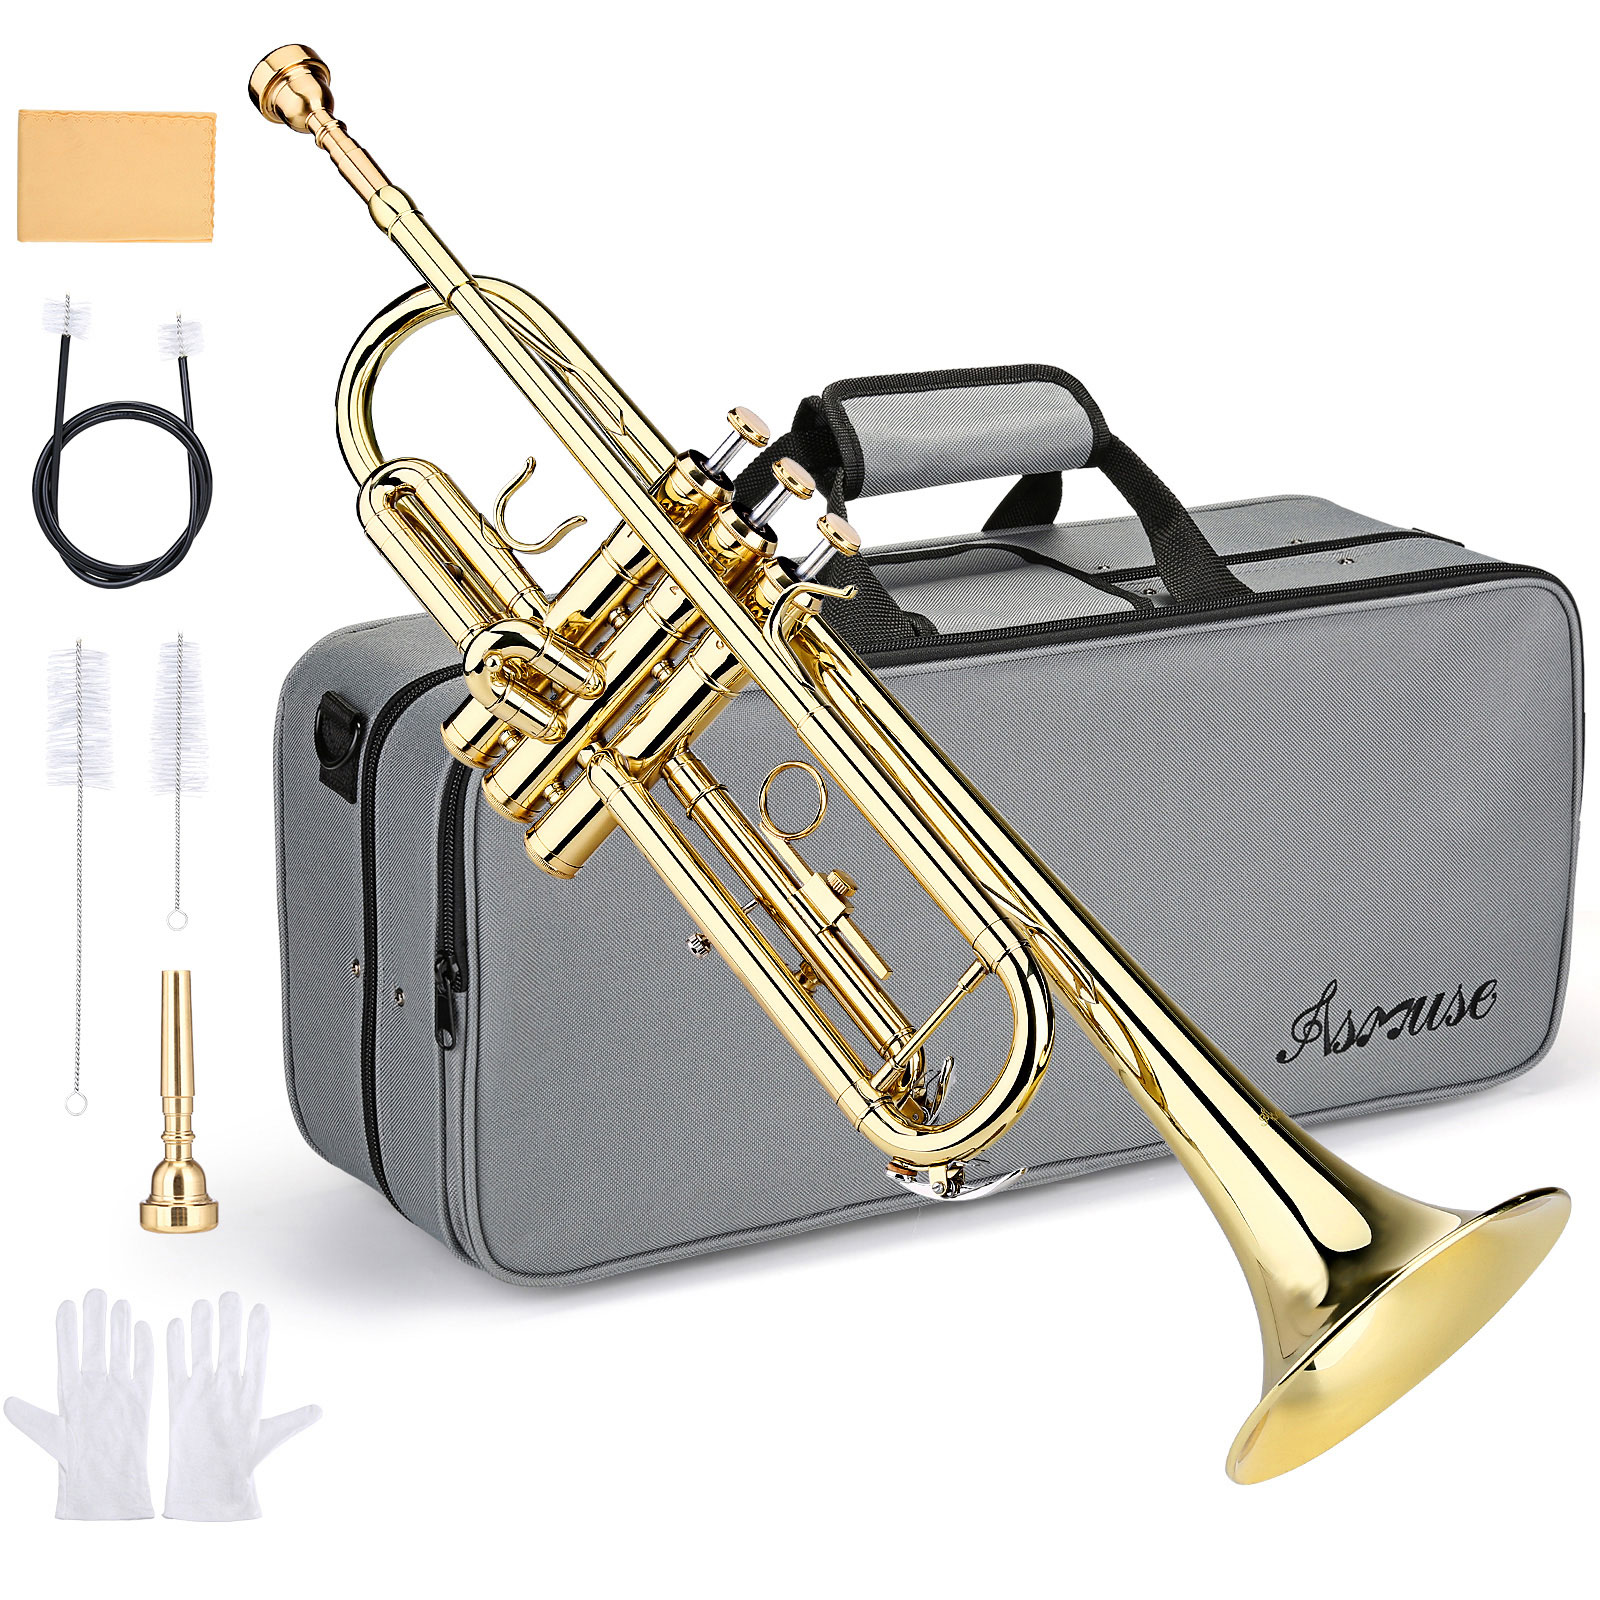 Color:Gold:BB TRUMPET- STUDENT BAND TRUMPETS BRASS INSTRUMENT WITH HARD CASE FOR BEGINNER